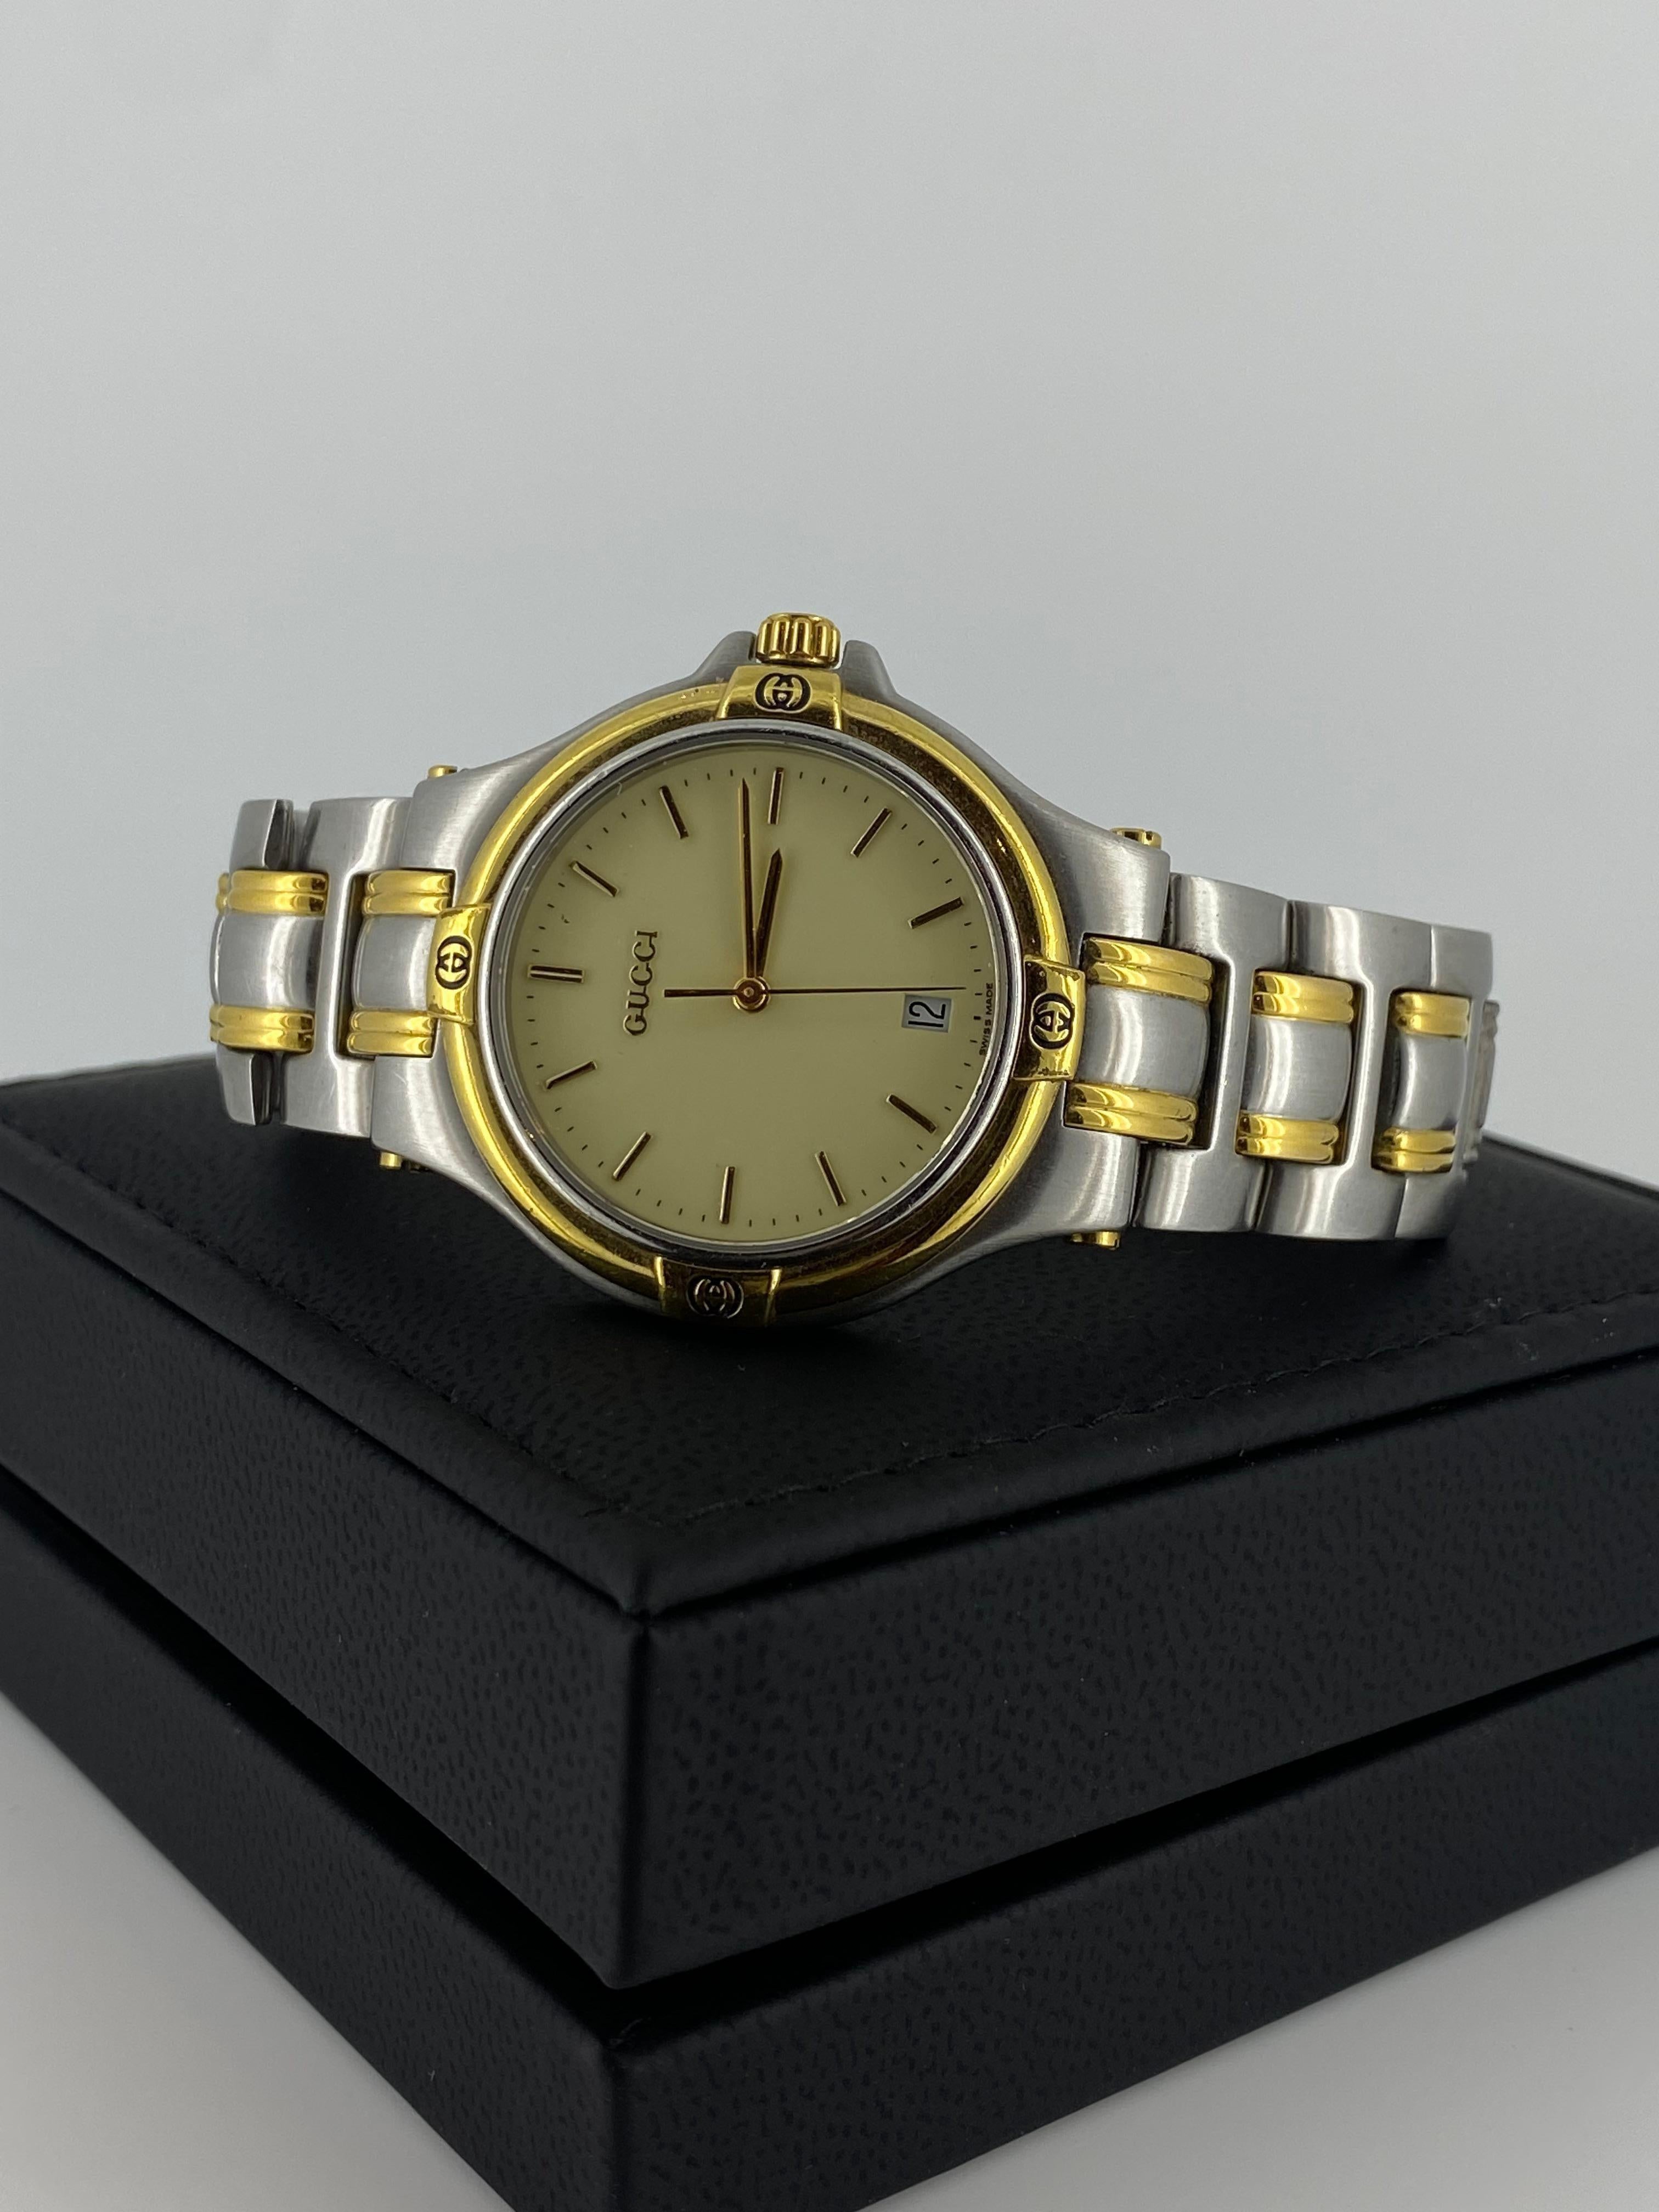 This Two-Tone elegant Gucci wristwatch
features a 36mm stainless steel case, 
3ATM water-resistant, 
with striking logo-adorned golden bezel &
signed crown 

Sturdy stainless steel bracelet features gold accents, 
hidden butterfly signed clasp &